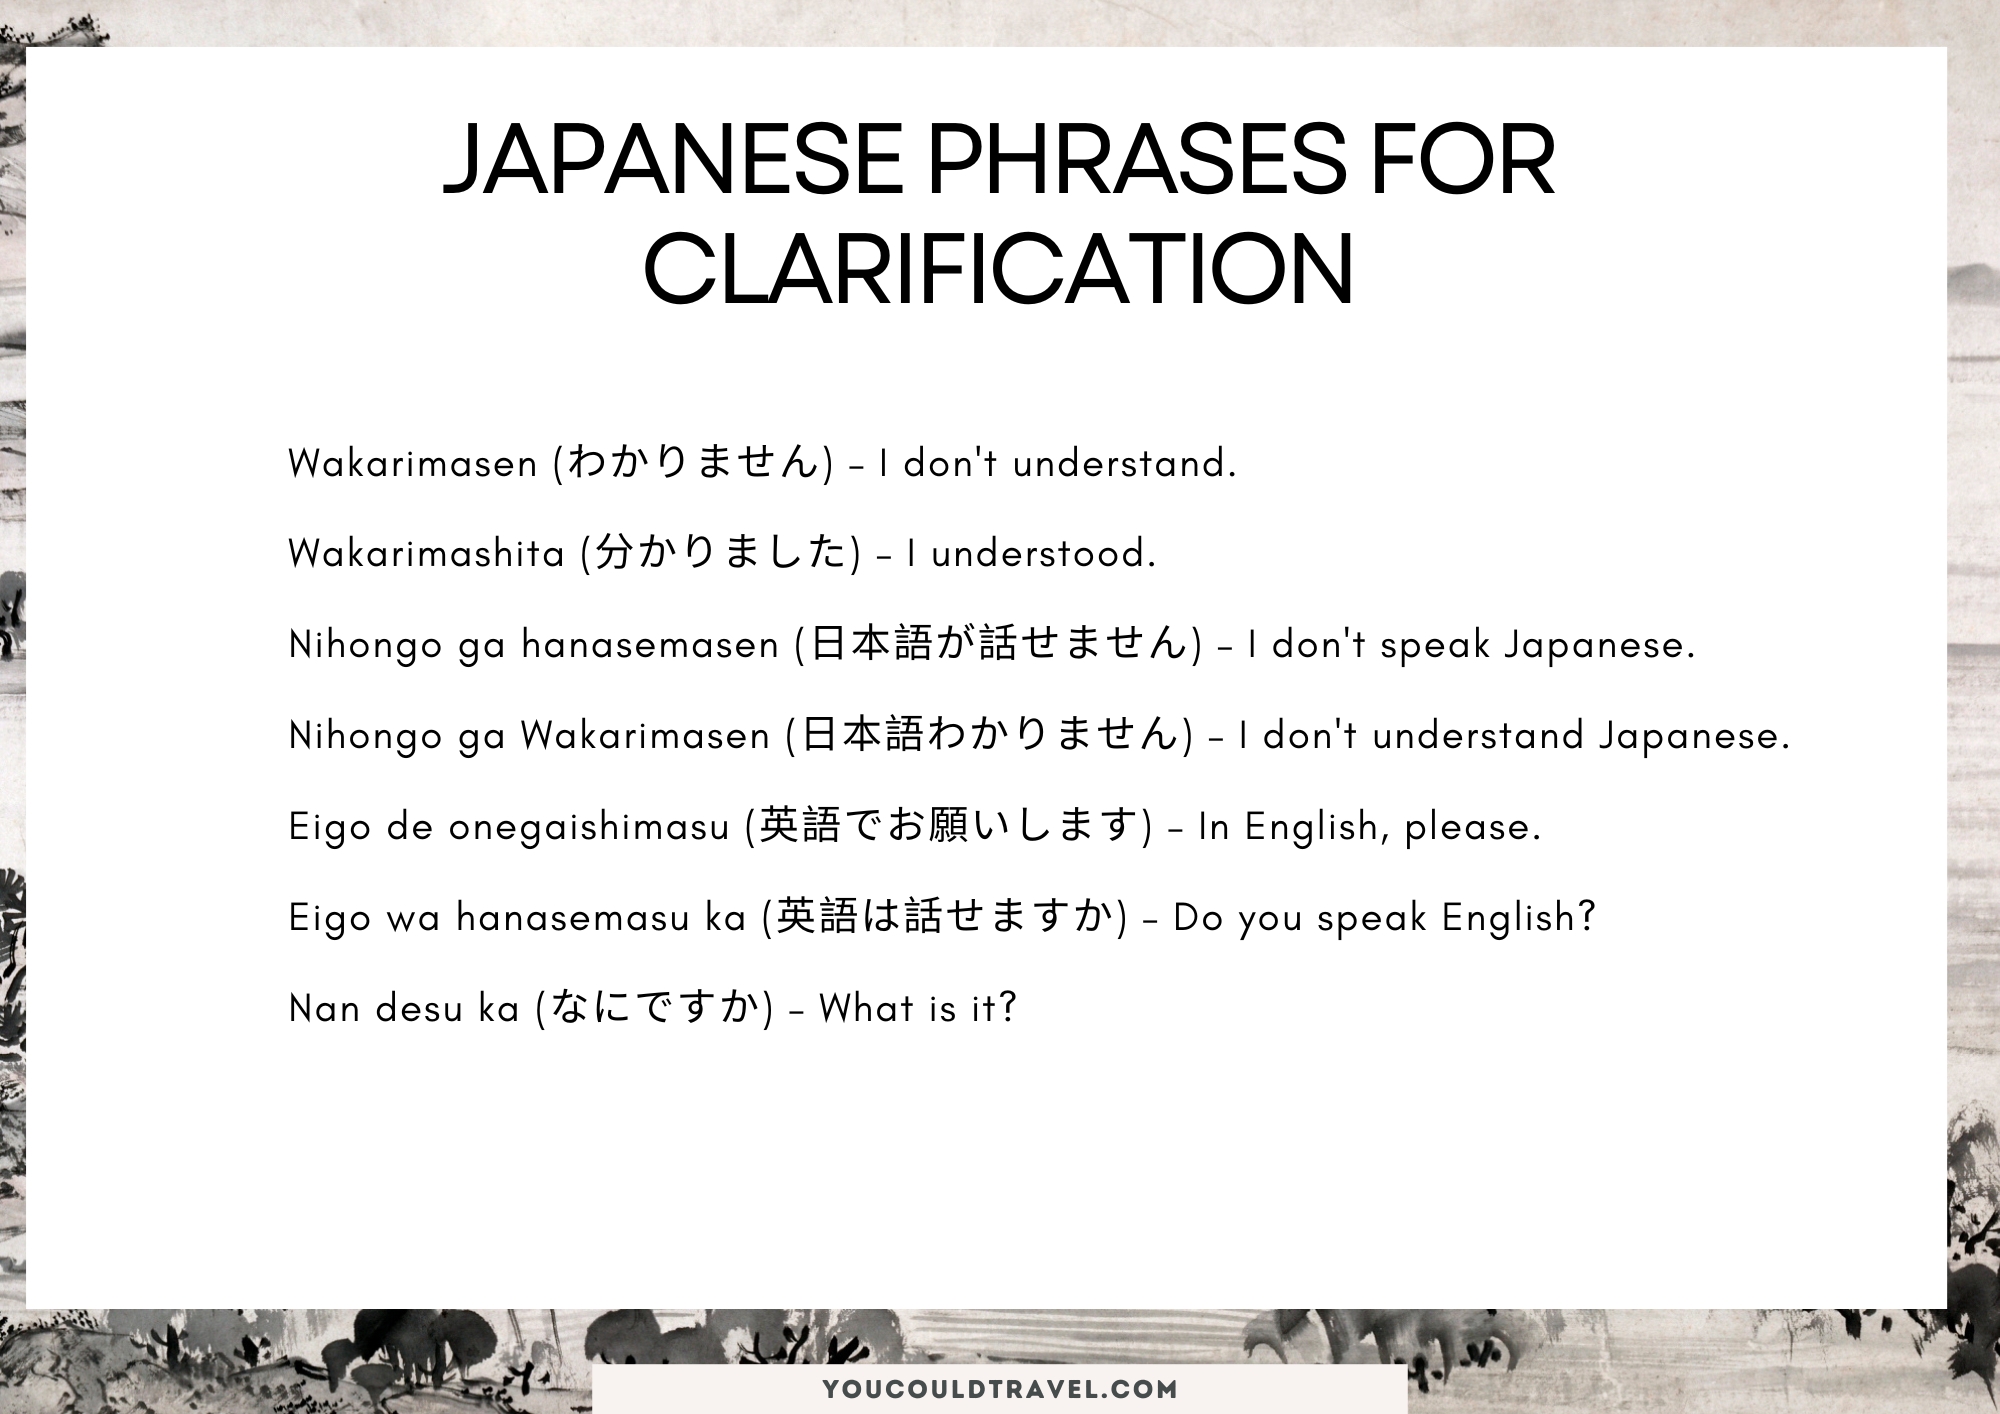 Japanese phrases used for clarification